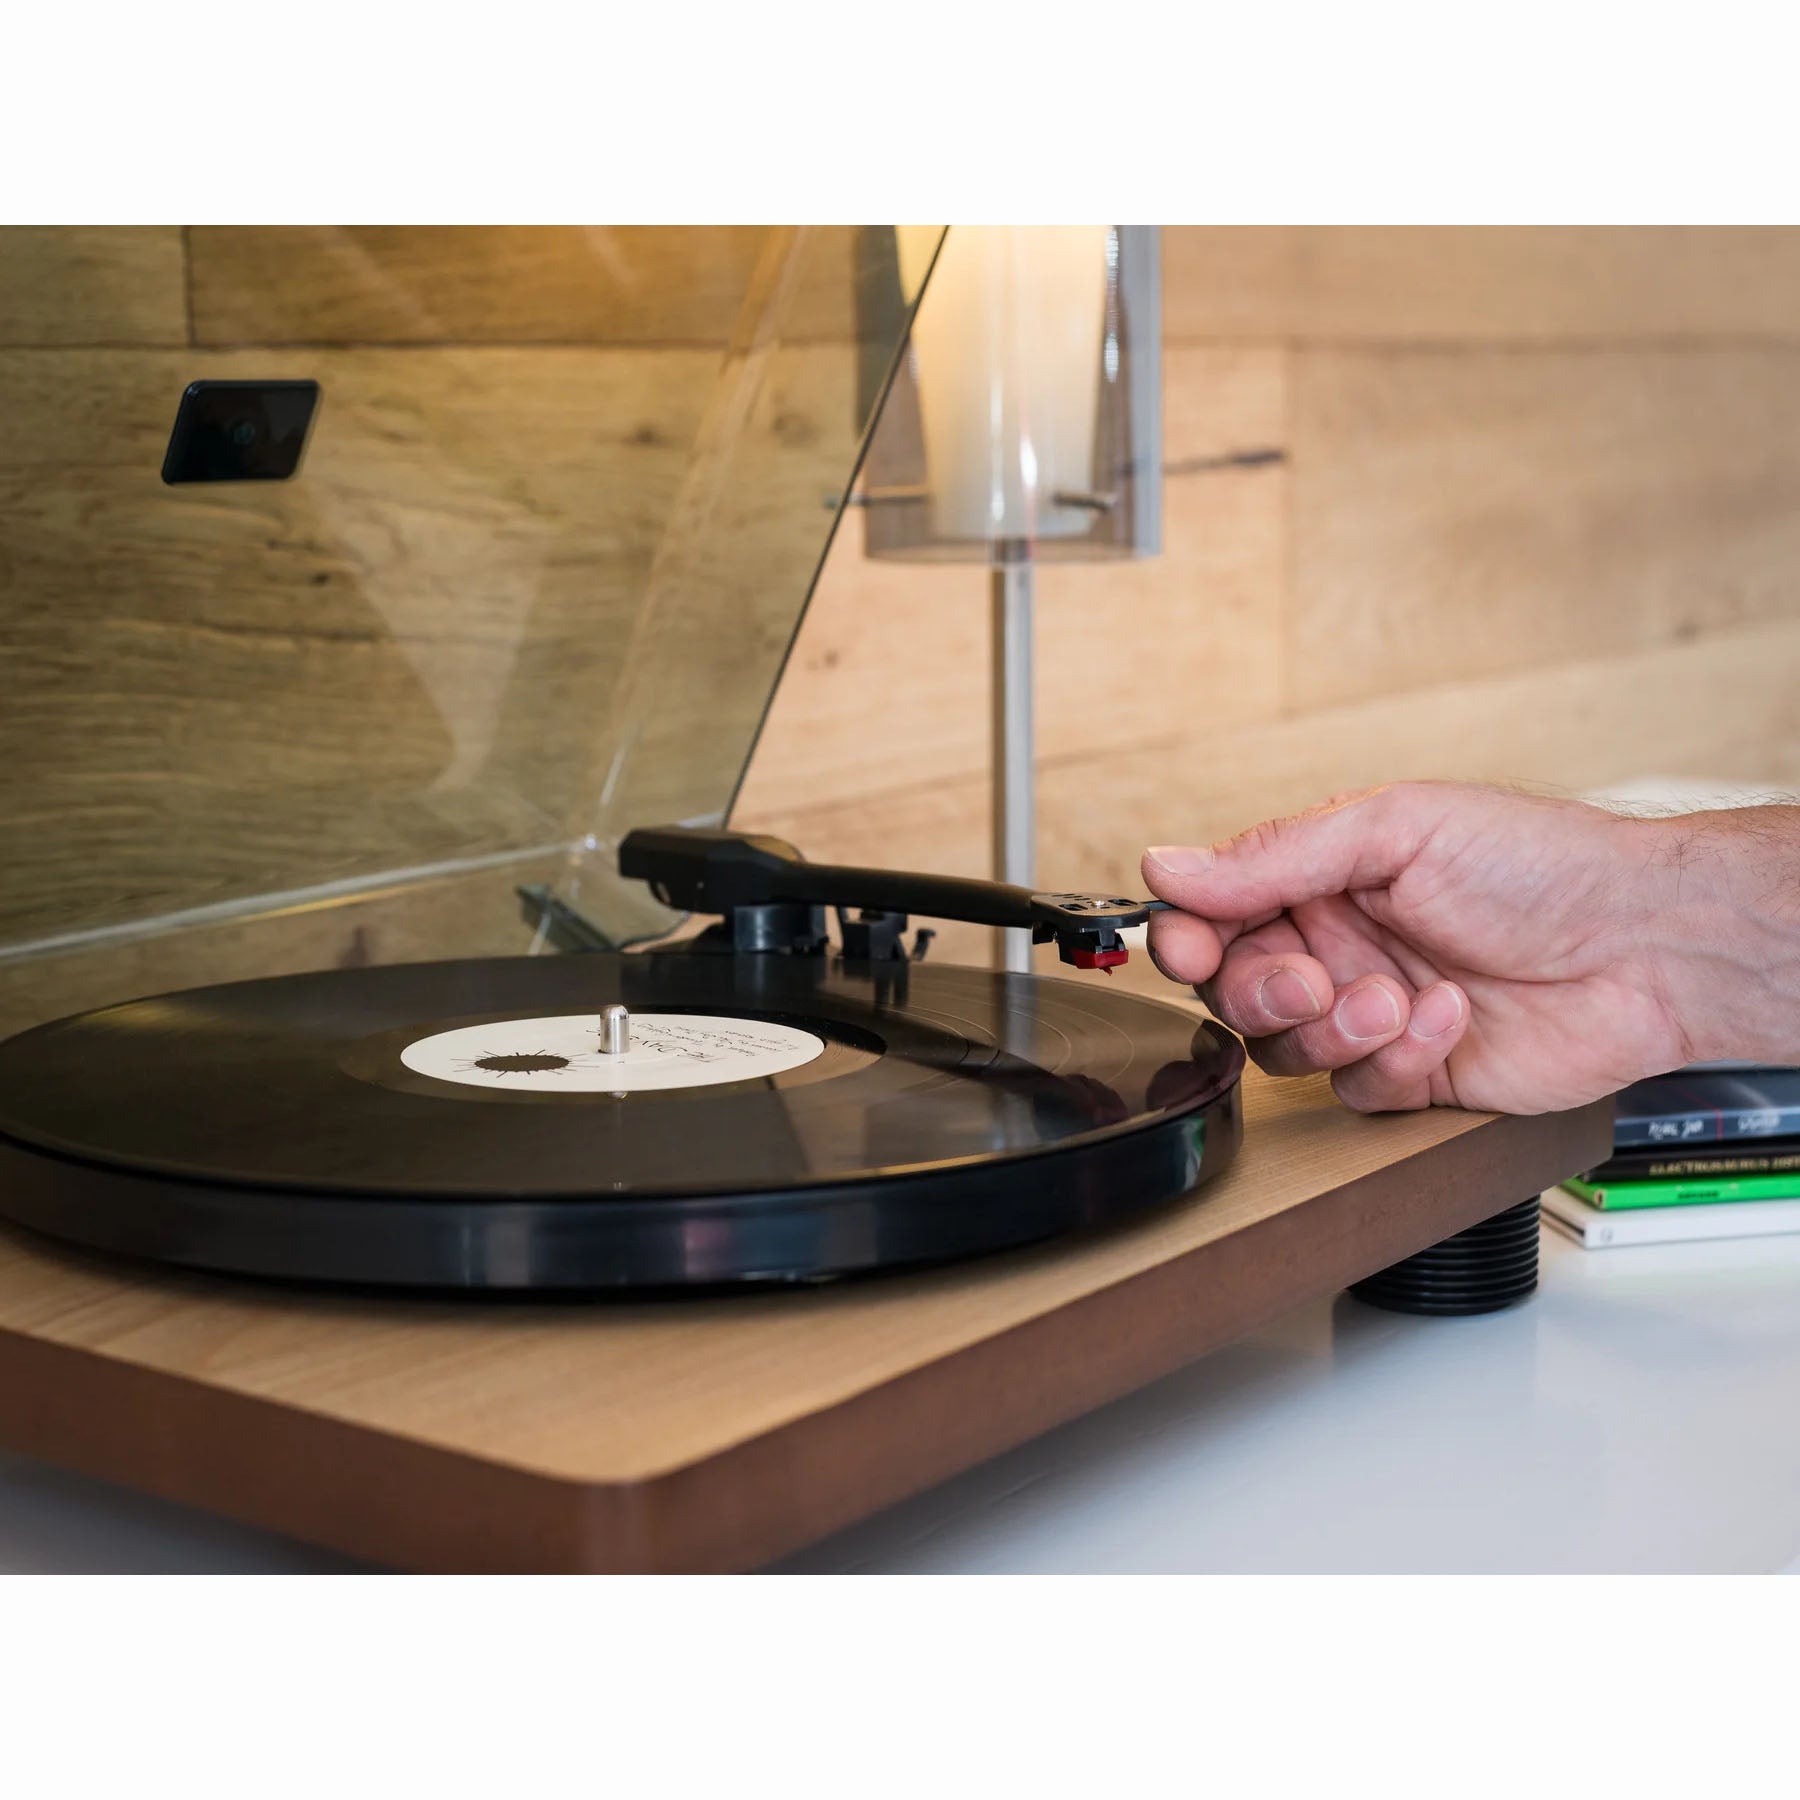 Lenco LS-50 Turntable with Built-In Speakers USB Encoding